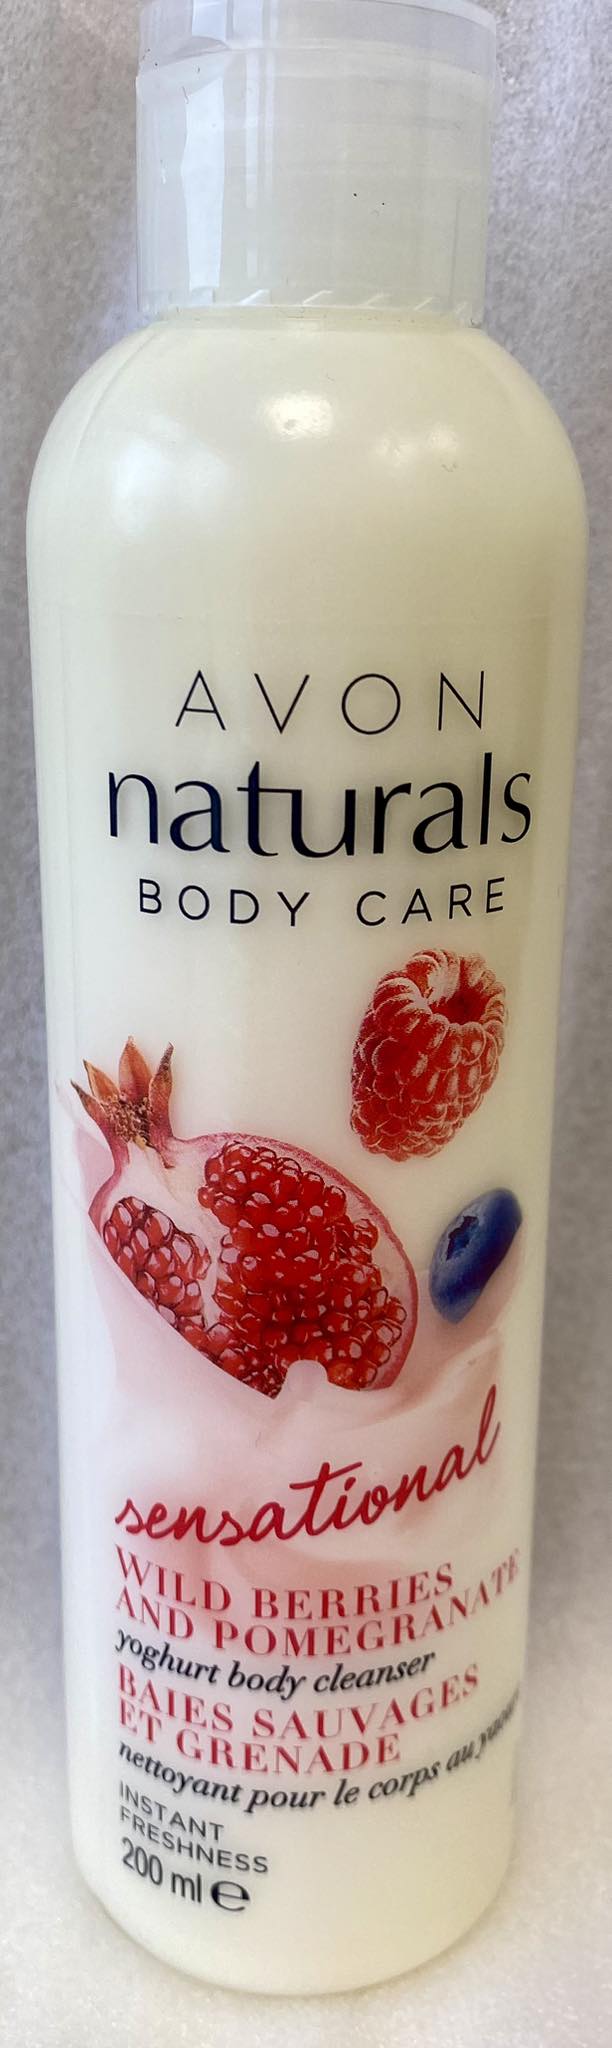 Body lotion - Naturals Body Care